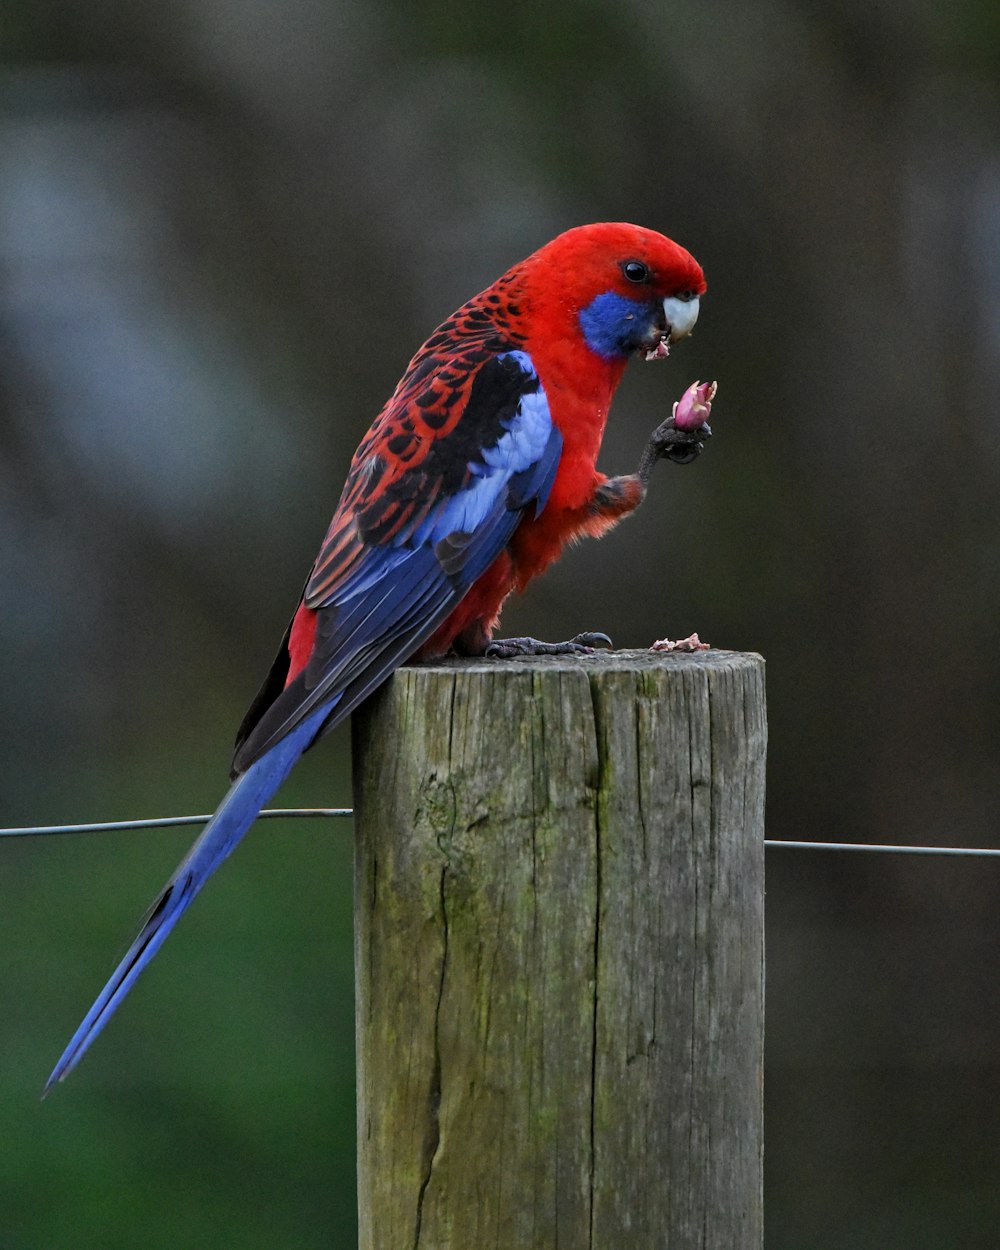 a red and blue bird sitting on top of a wooden post